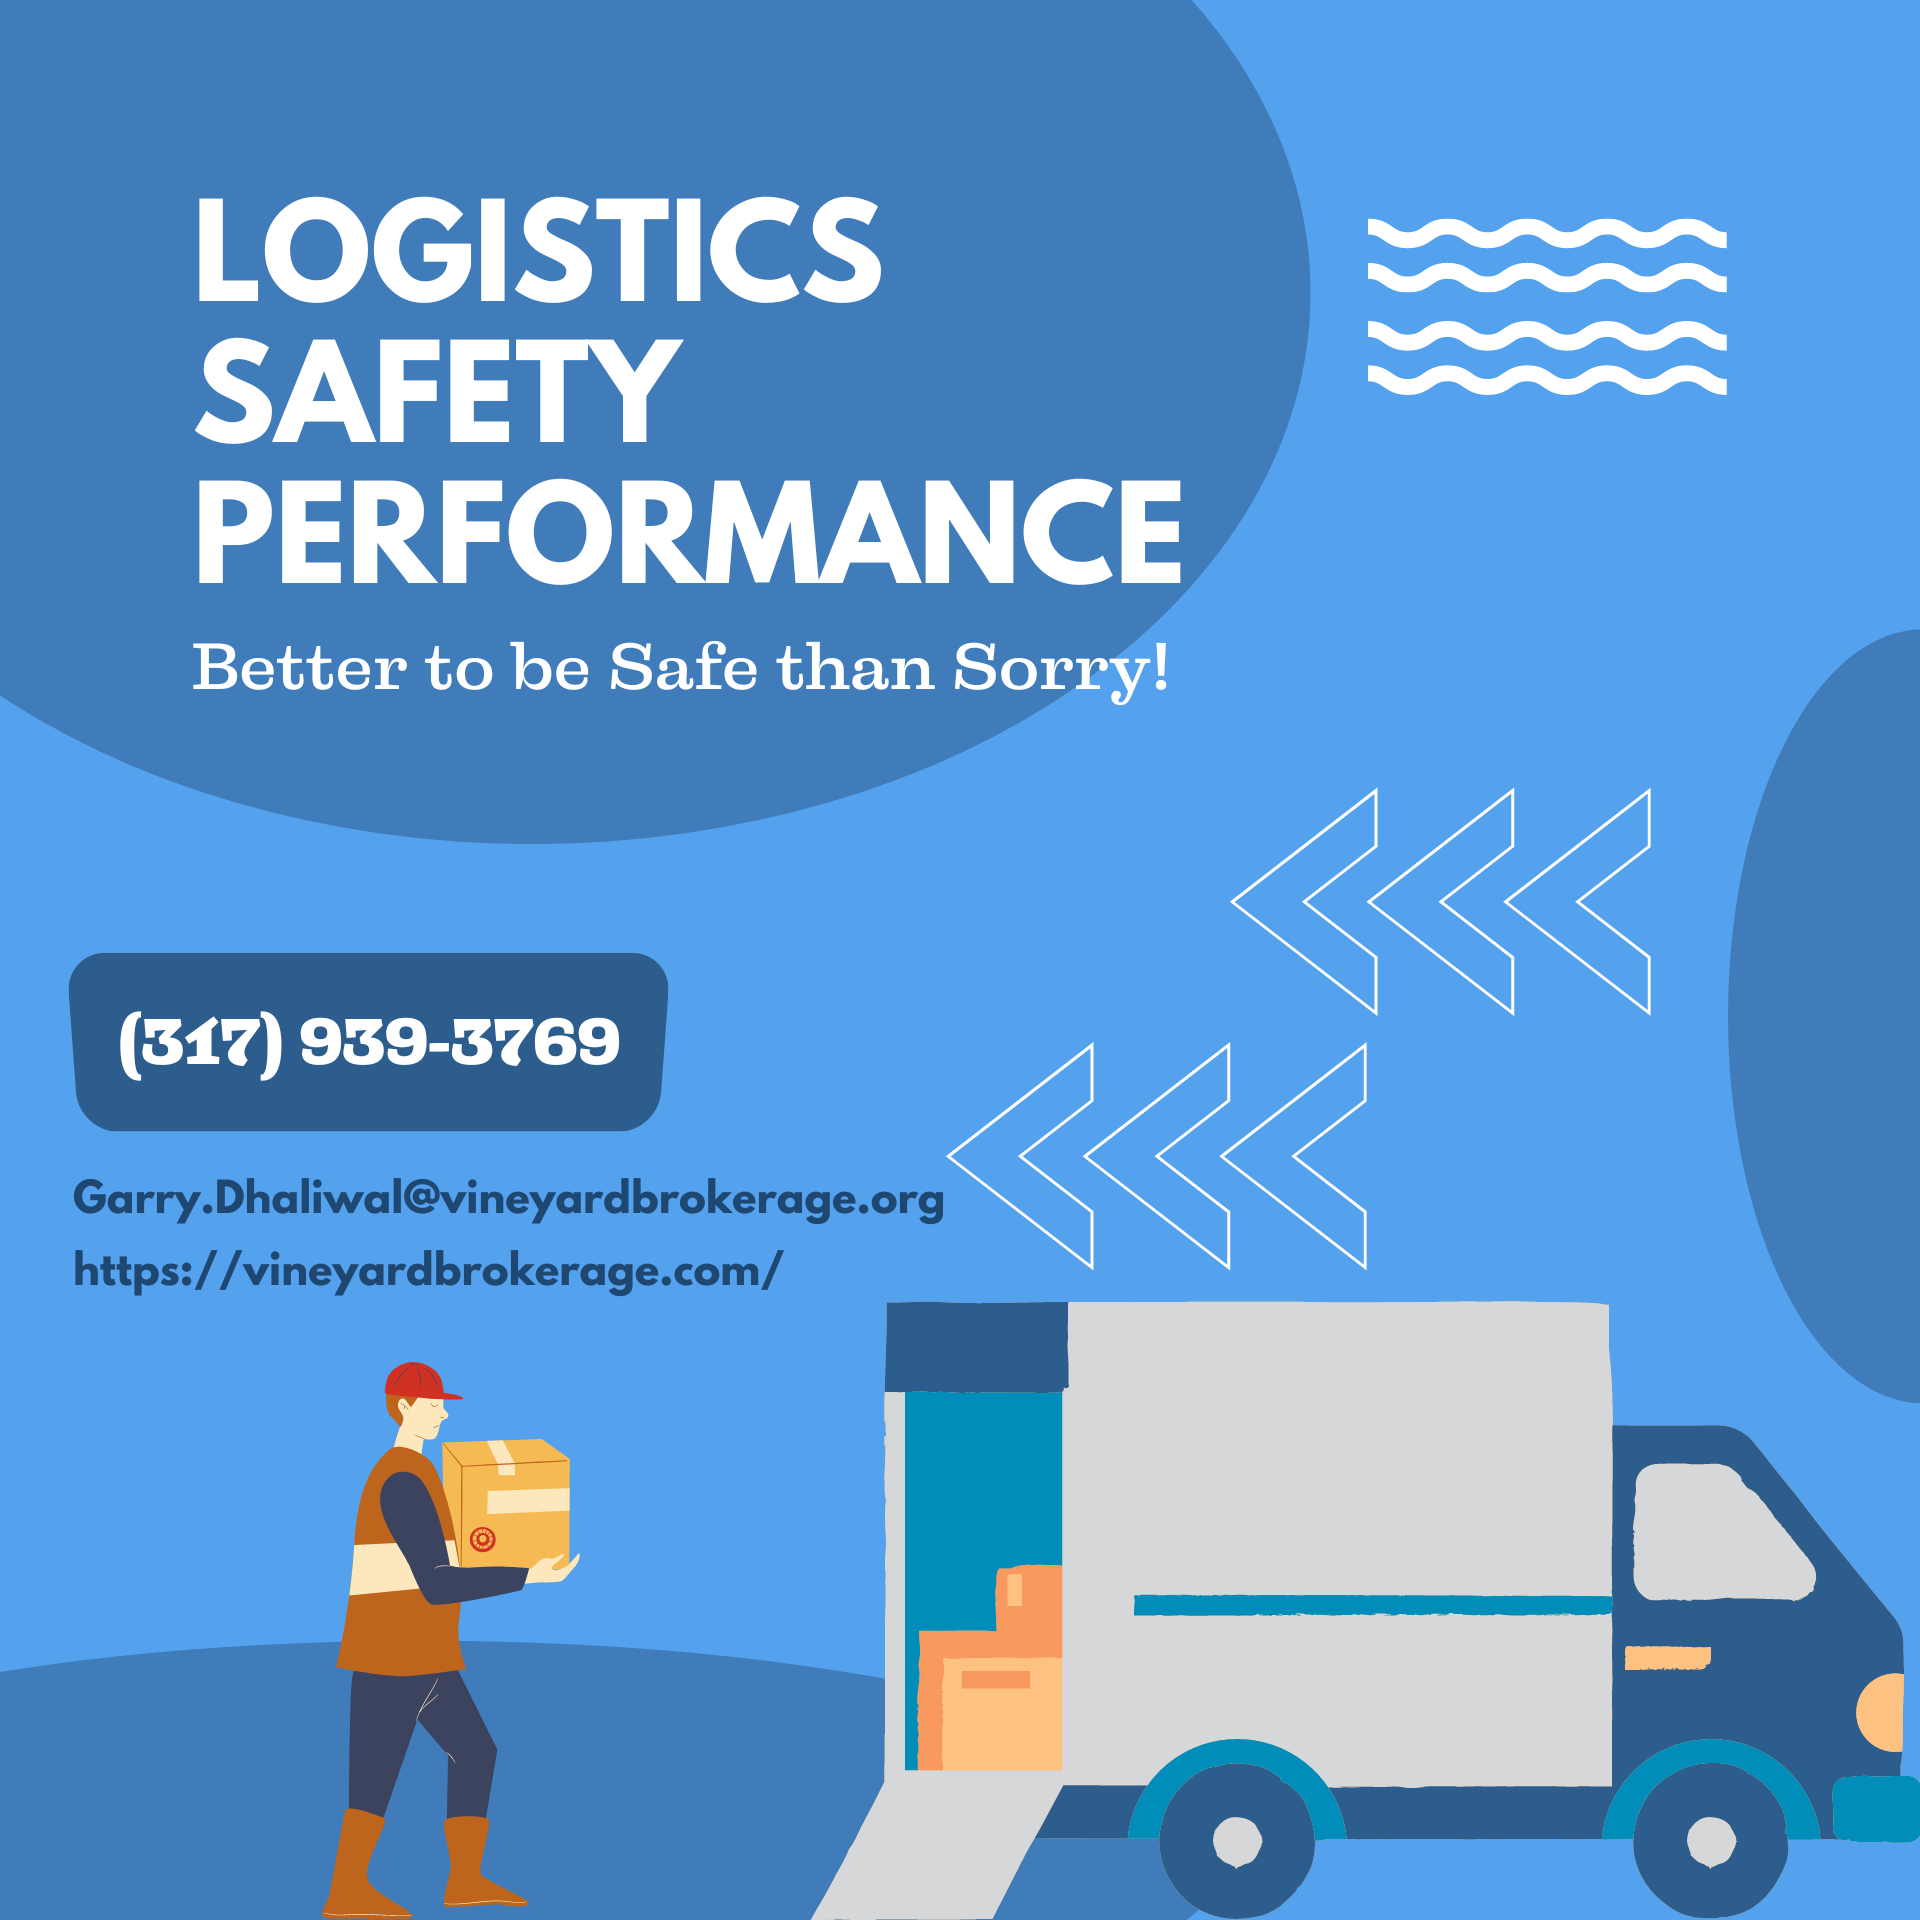 How to Improve Logistics Safety Performance in Your Operations?